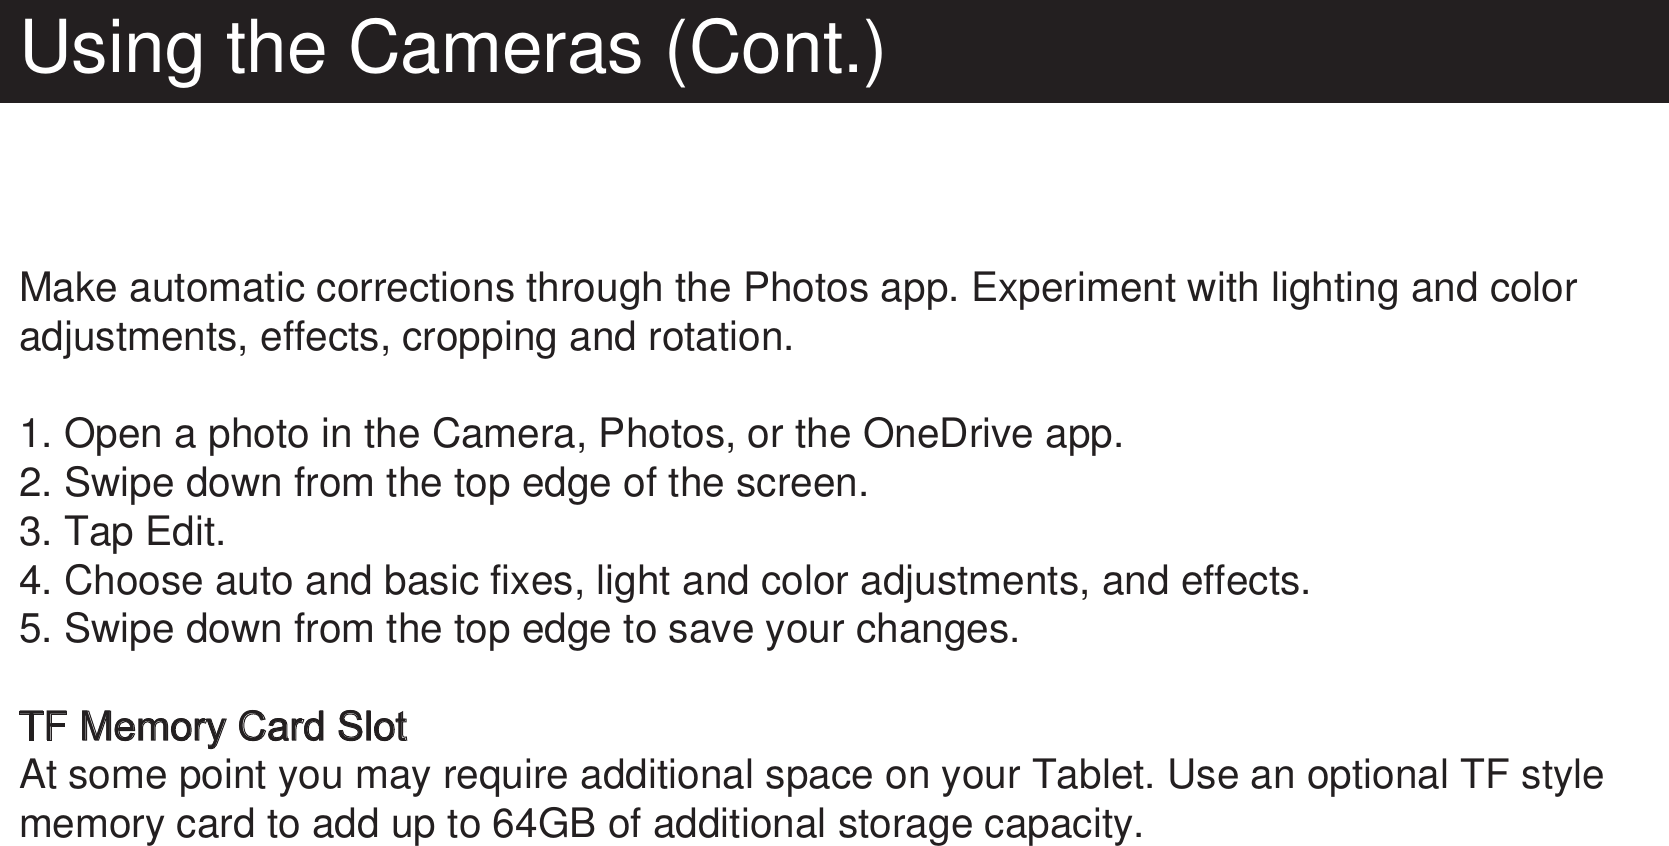 Using the Cameras (Cont.)Make automatic corrections through the Photos app. Experiment with lighting and color adjustments, effects, cropping and rotation.1. Open a photo in the Camera, Photos, or the OneDrive app.2. Swipe down from the top edge of the screen.3. Tap Edit.4. Choose auto and basic fixes, light and color adjustments, and effects.5. Swipe down from the top edge to save your changes.TF Memory Card SlotAt some point you may require additional space on your Tablet. Use an optional TF style memory card to add up to 64GB of additional storage capacity. 